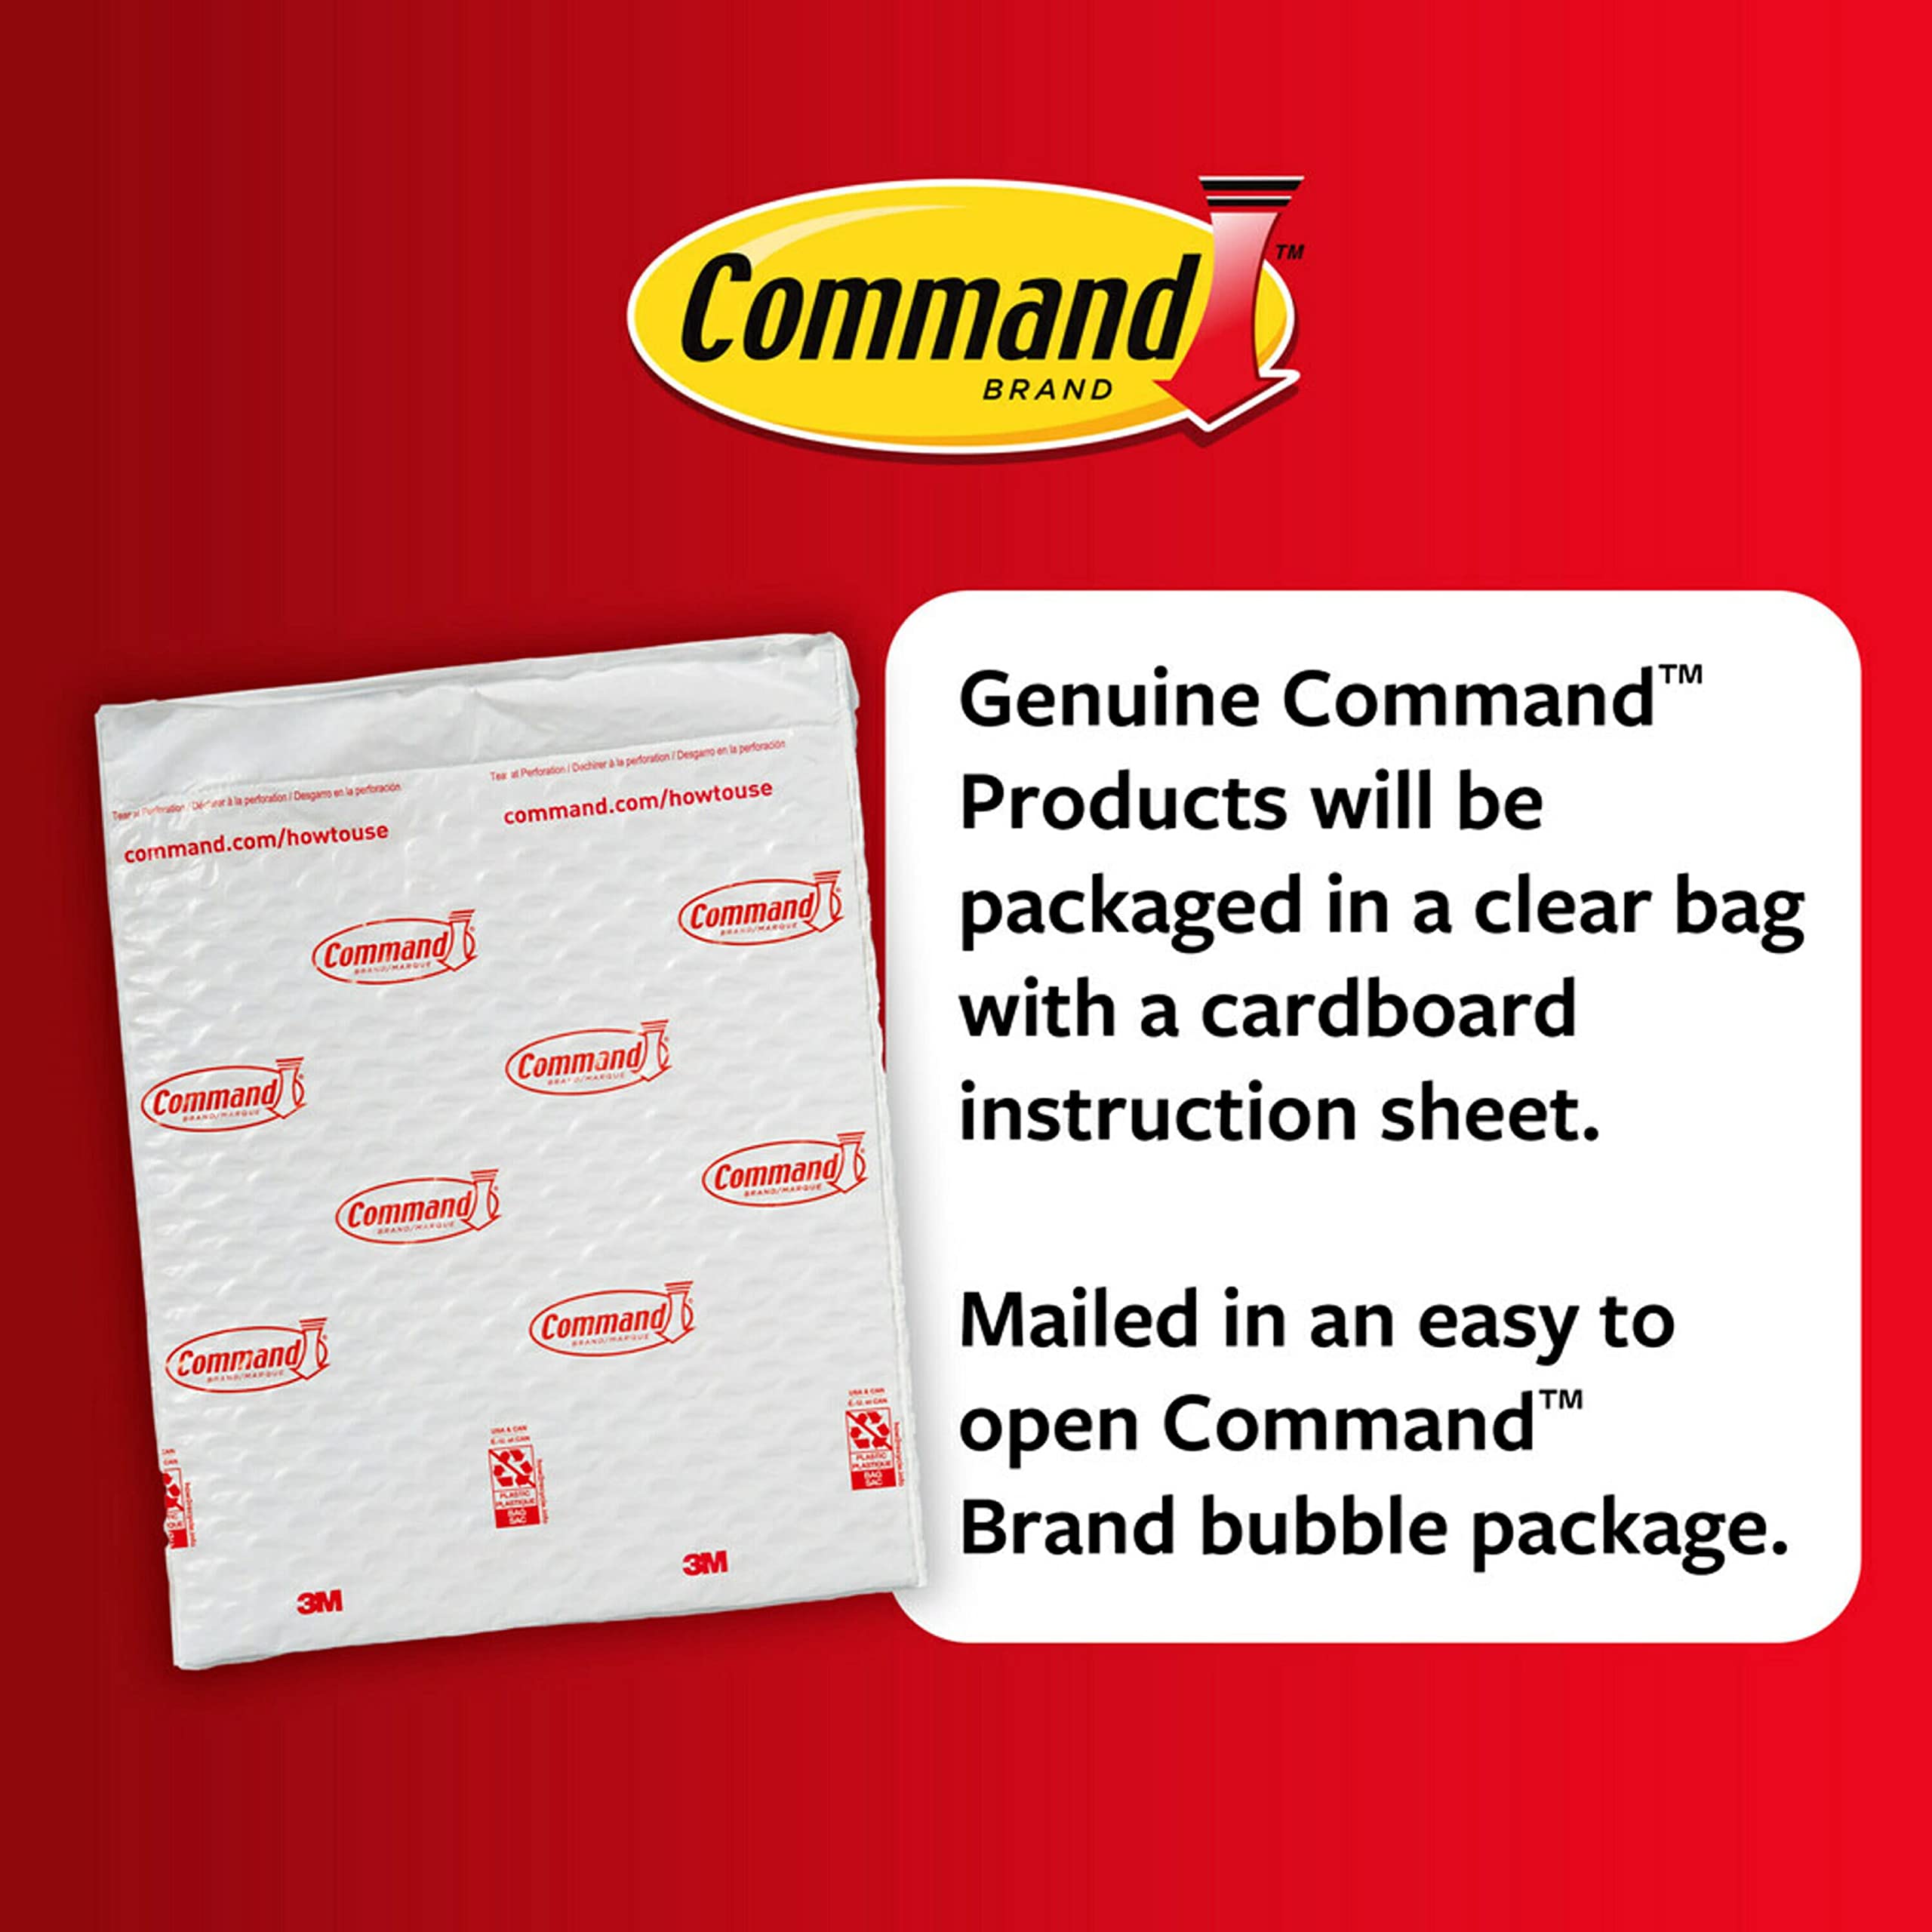 Command Large Refill Adhesive Strips, Damage Free Hanging Wall Adhesive Strips for Large Wall Hooks, No Tools Removable Adhesive Strips to Redecorate and Reorganize Dorm Rooms, 20 White Command Strips